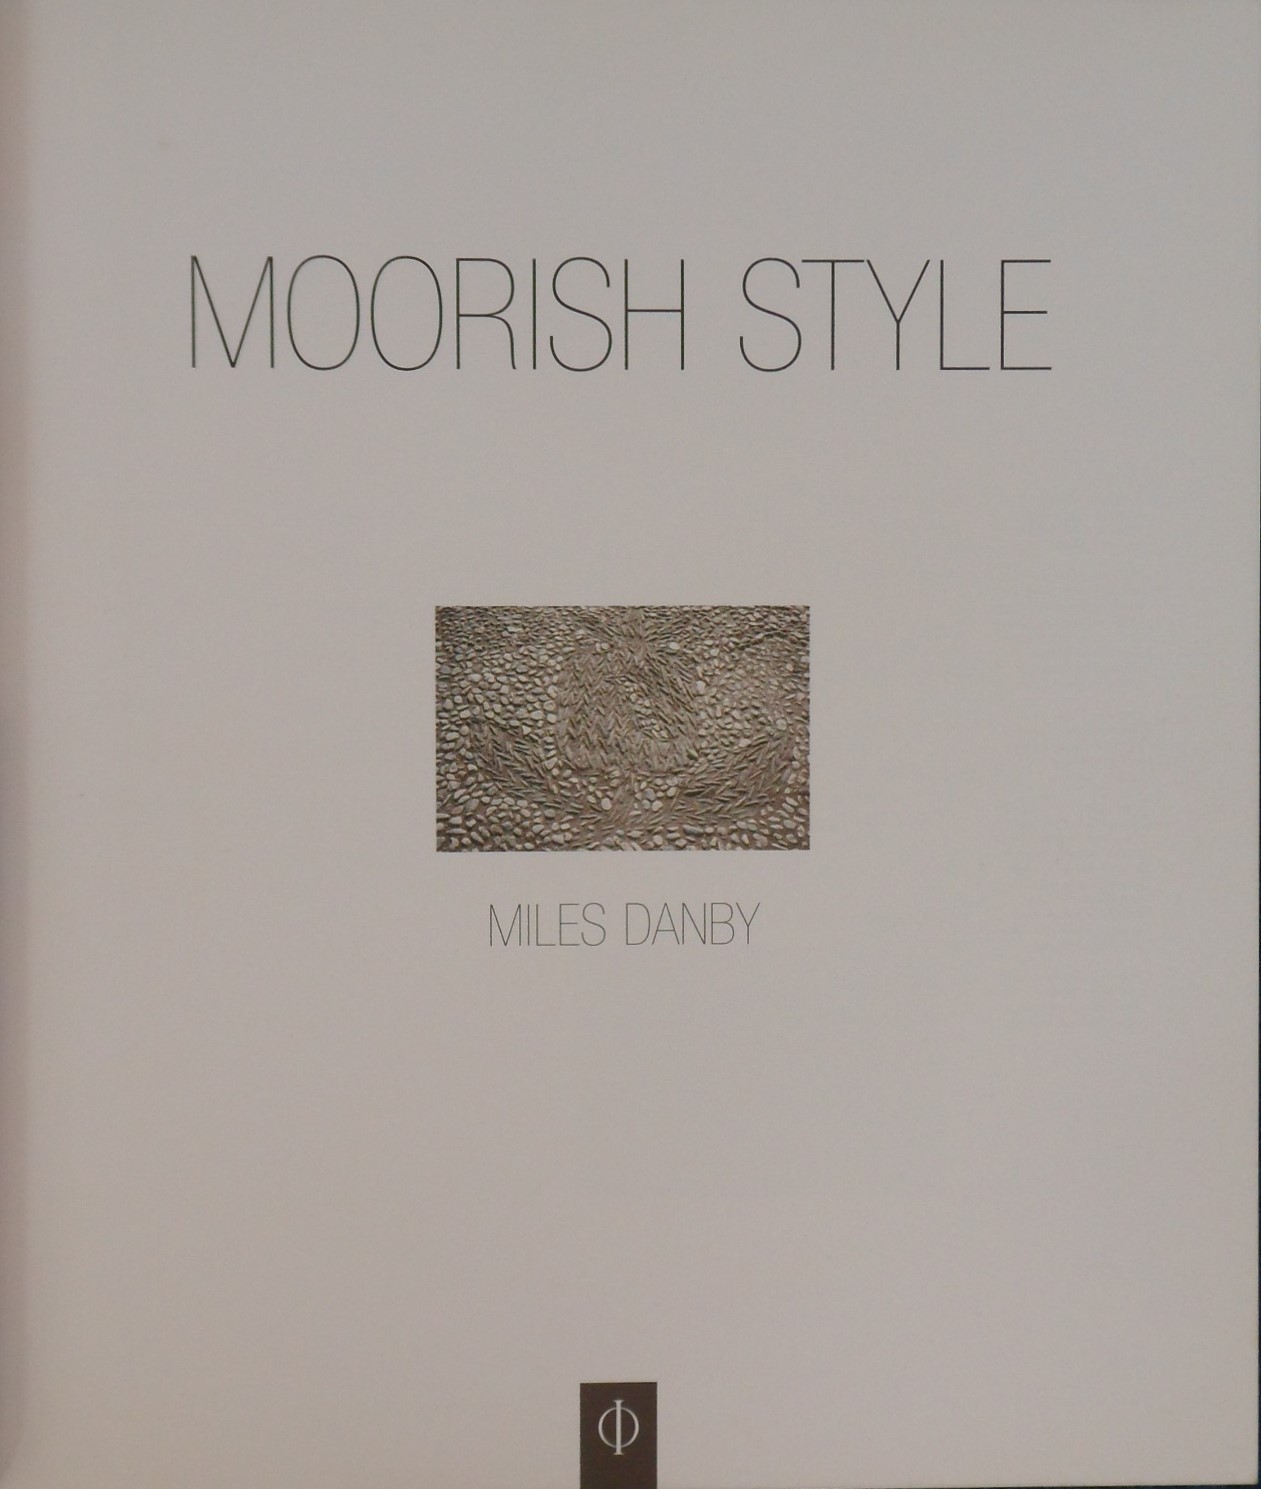 Miles Danby softback book Moorish Style by Miles Danby 2002 published by Phaidon press Inc in good - Image 2 of 2